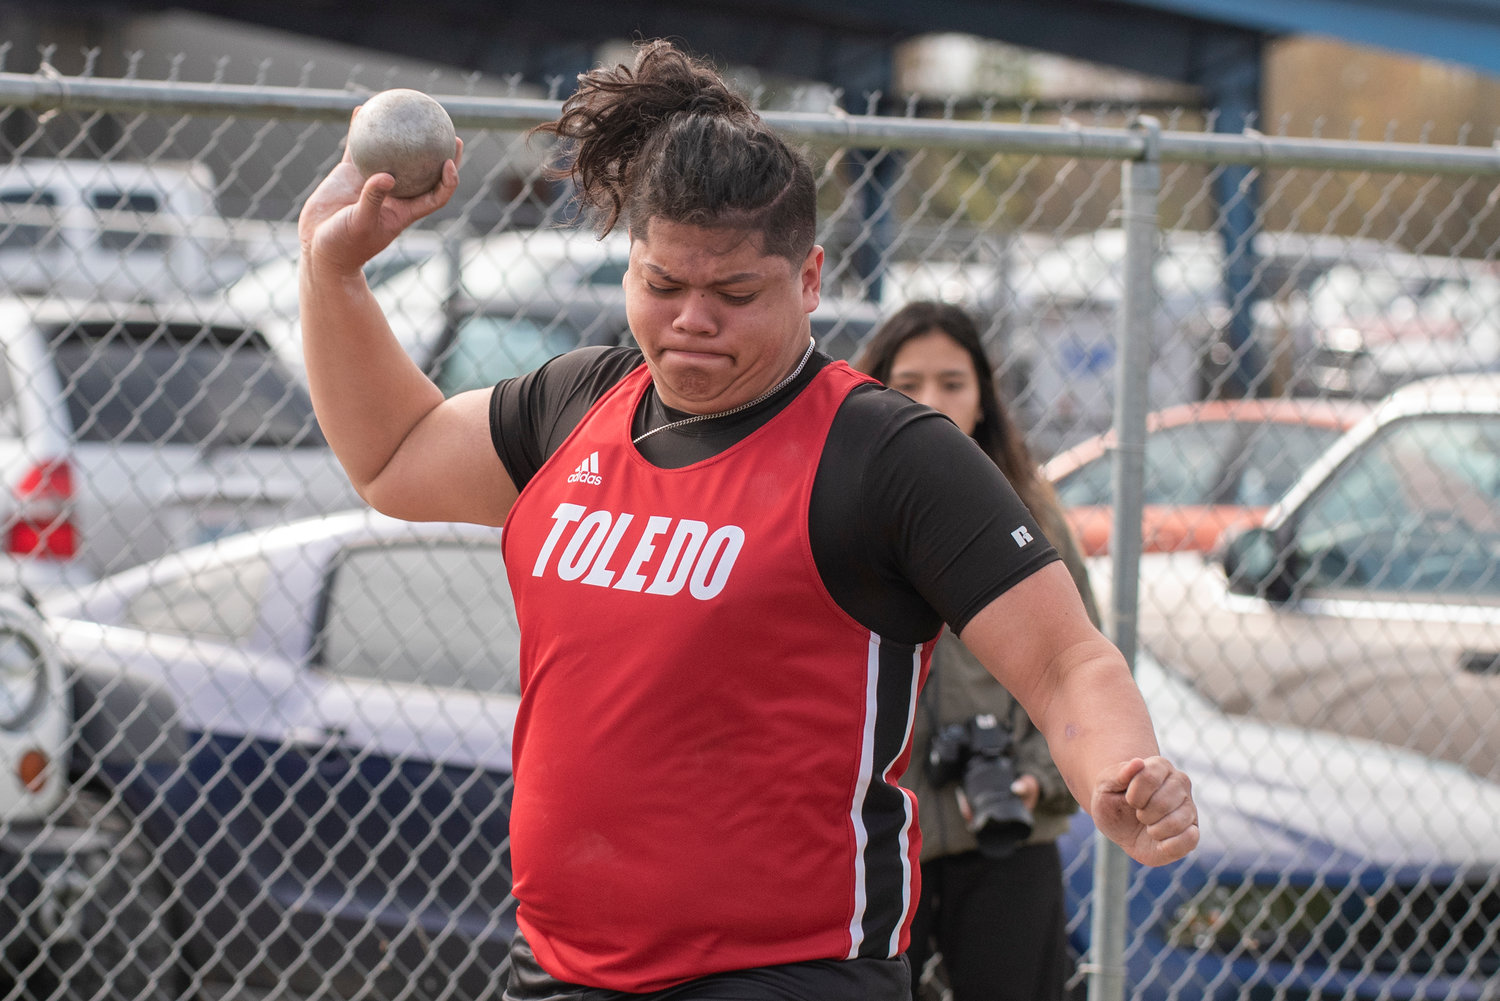 Toledo's Joshhill Tilton launches the shot put during the Pirate Classic in Adna on May 3.